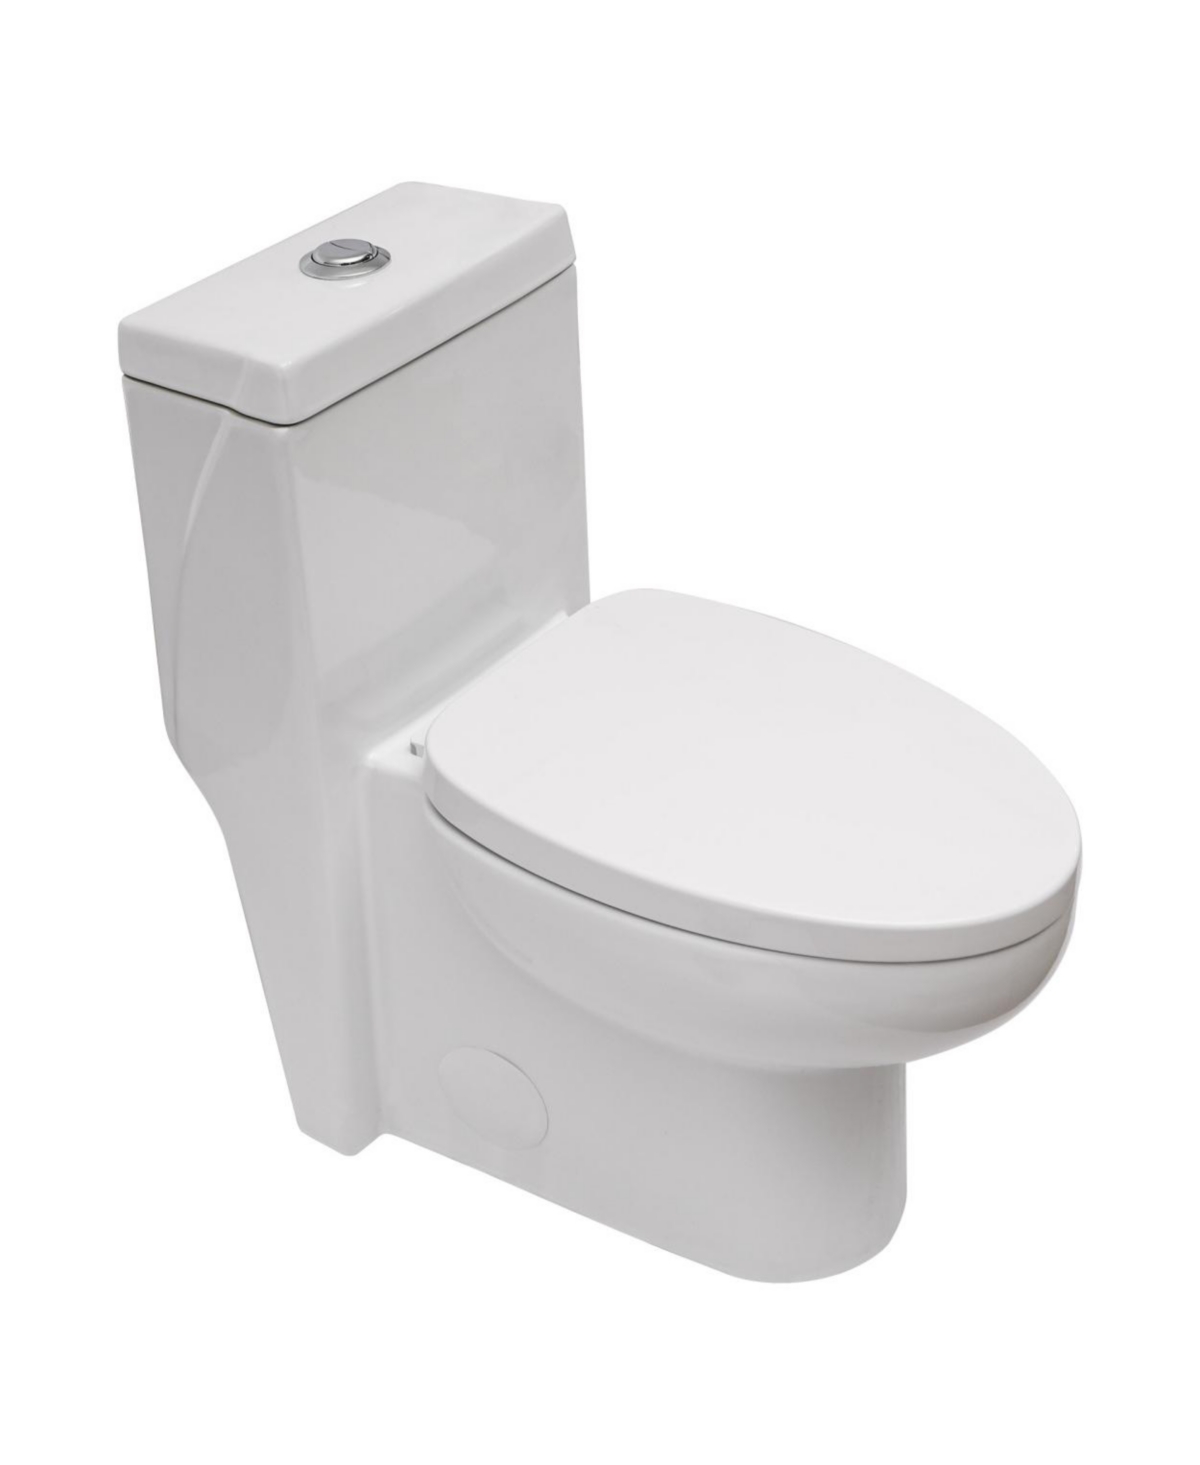 Ceramic One Piece Toilet, Dual Flush With Soft Closing Seat 0000 - White